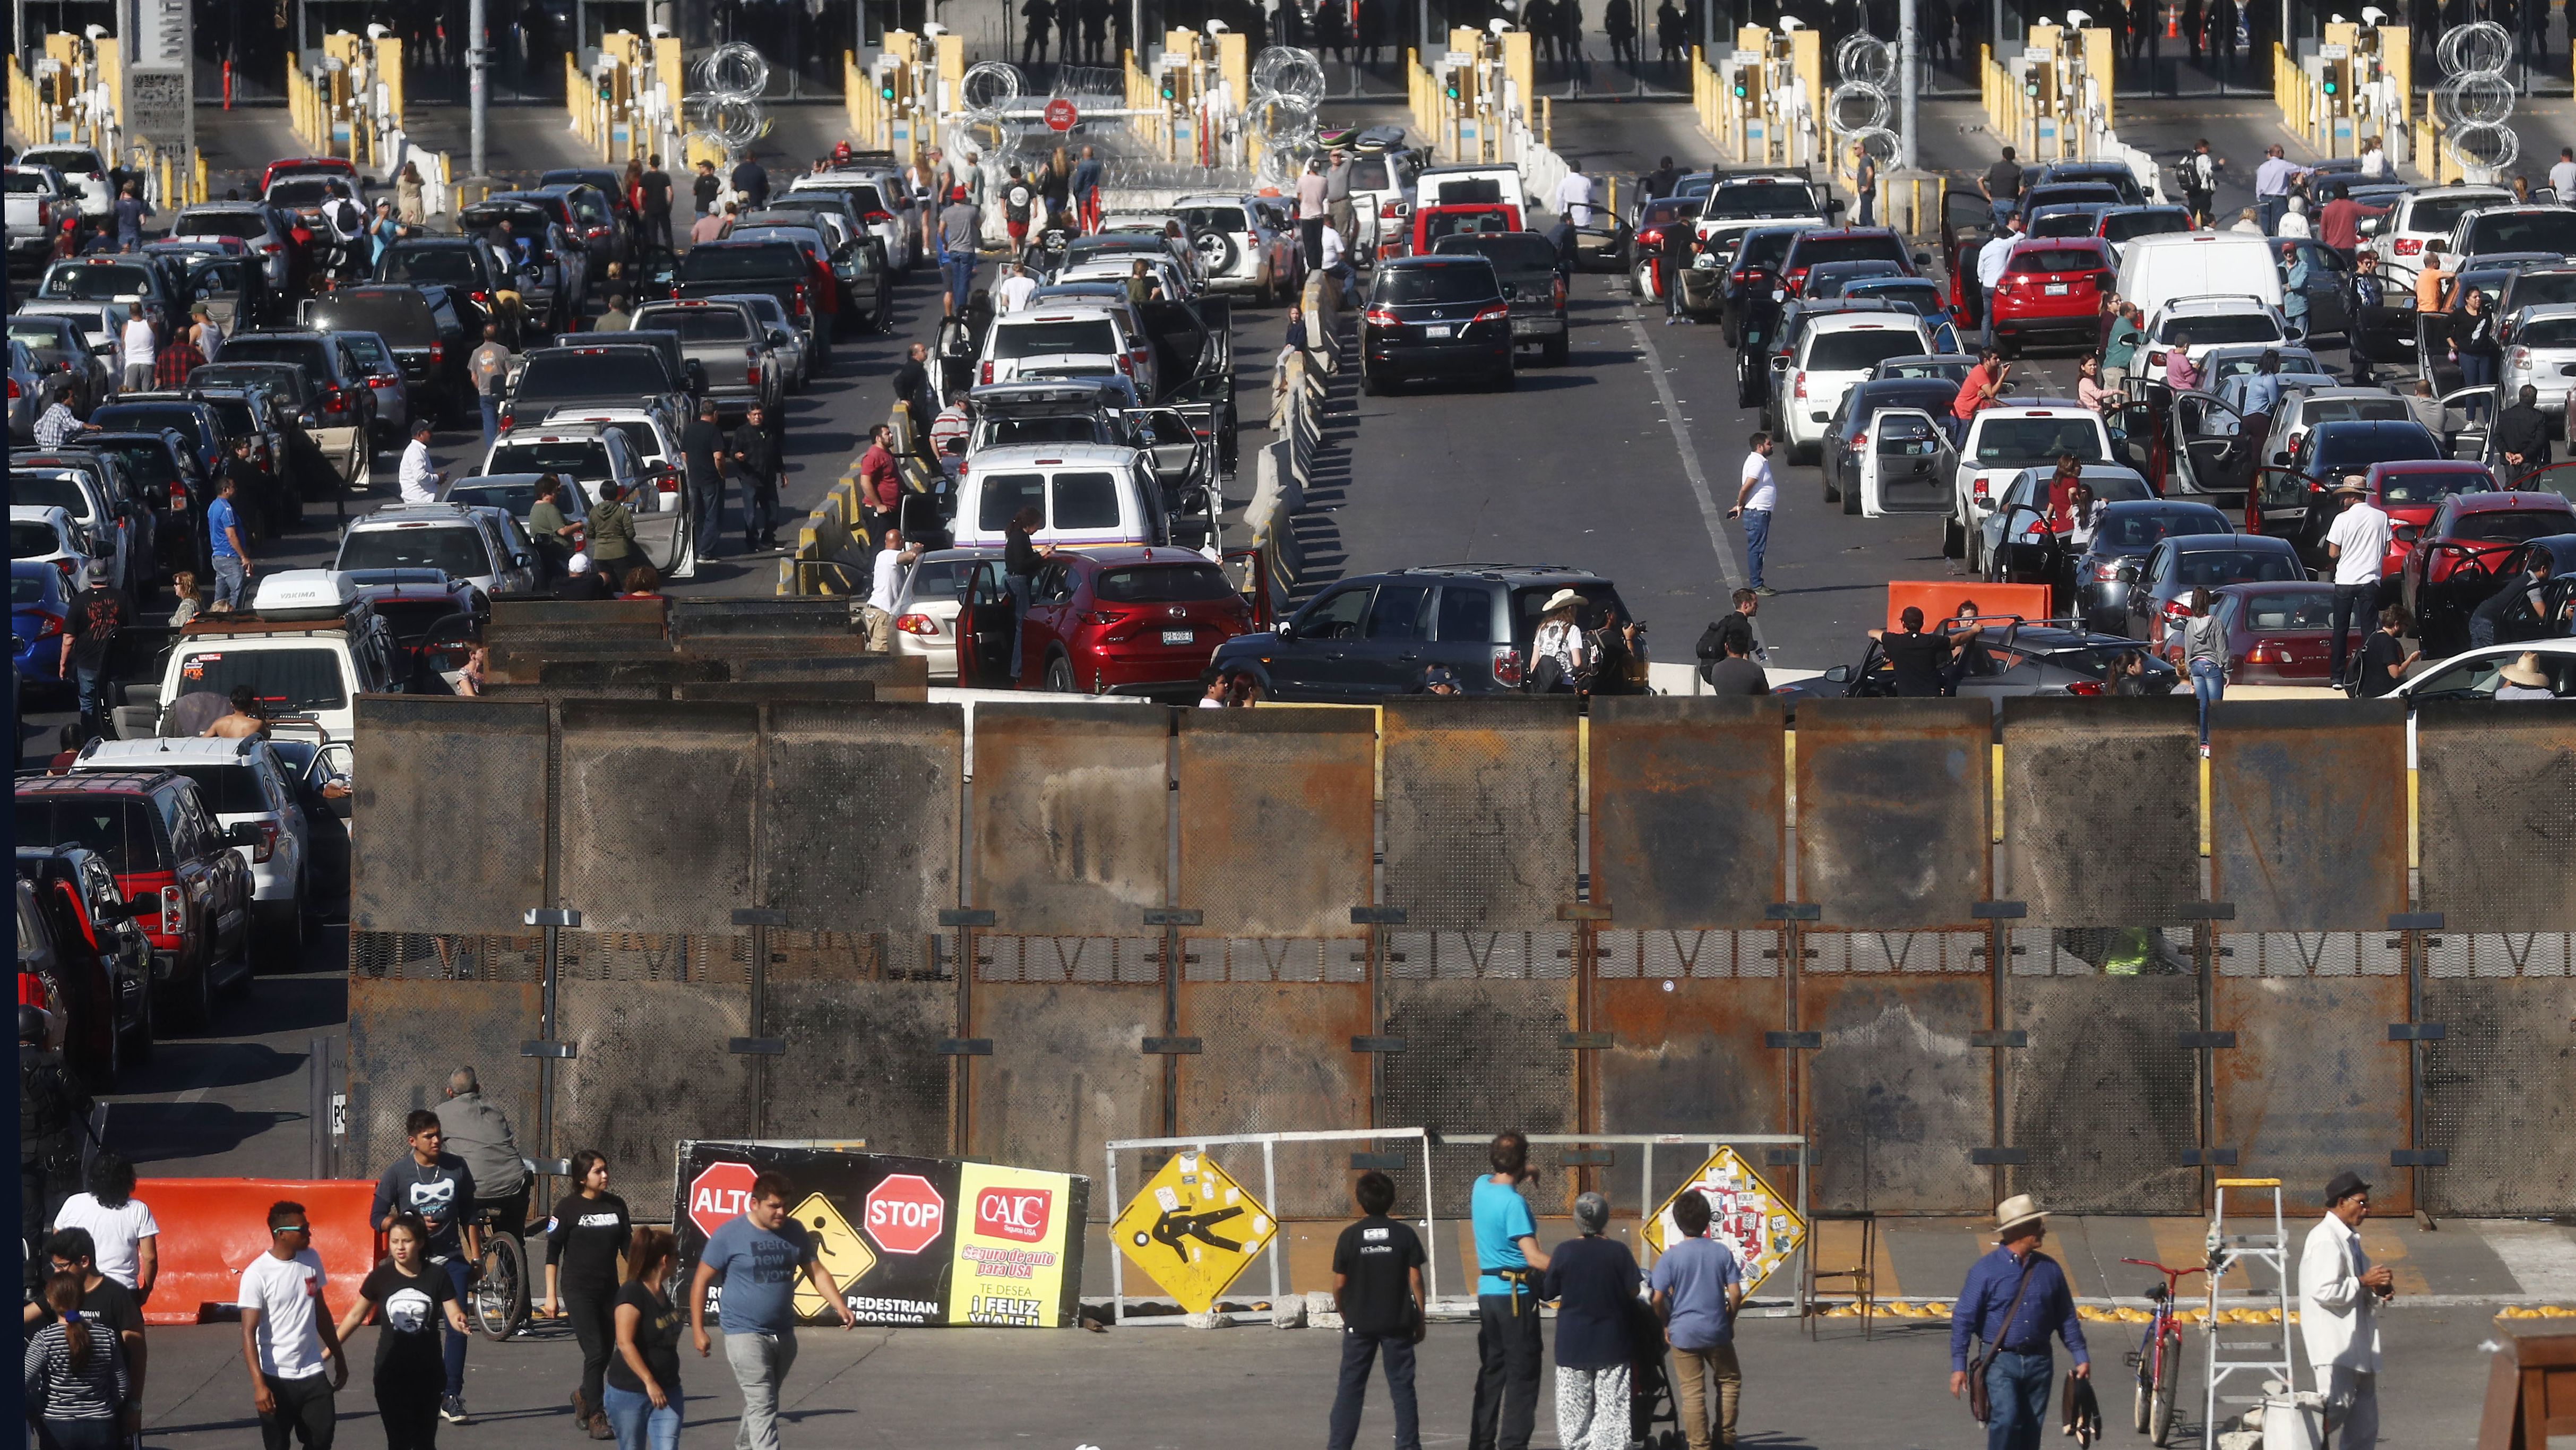 People attempting to cross in the U.S. look on as the San Ysidro port of entry stands closed at the U.S.-Mexico border on November 25, 2018 in Tijuana, Mexico.  (Photo by Mario Tama/Getty Images)